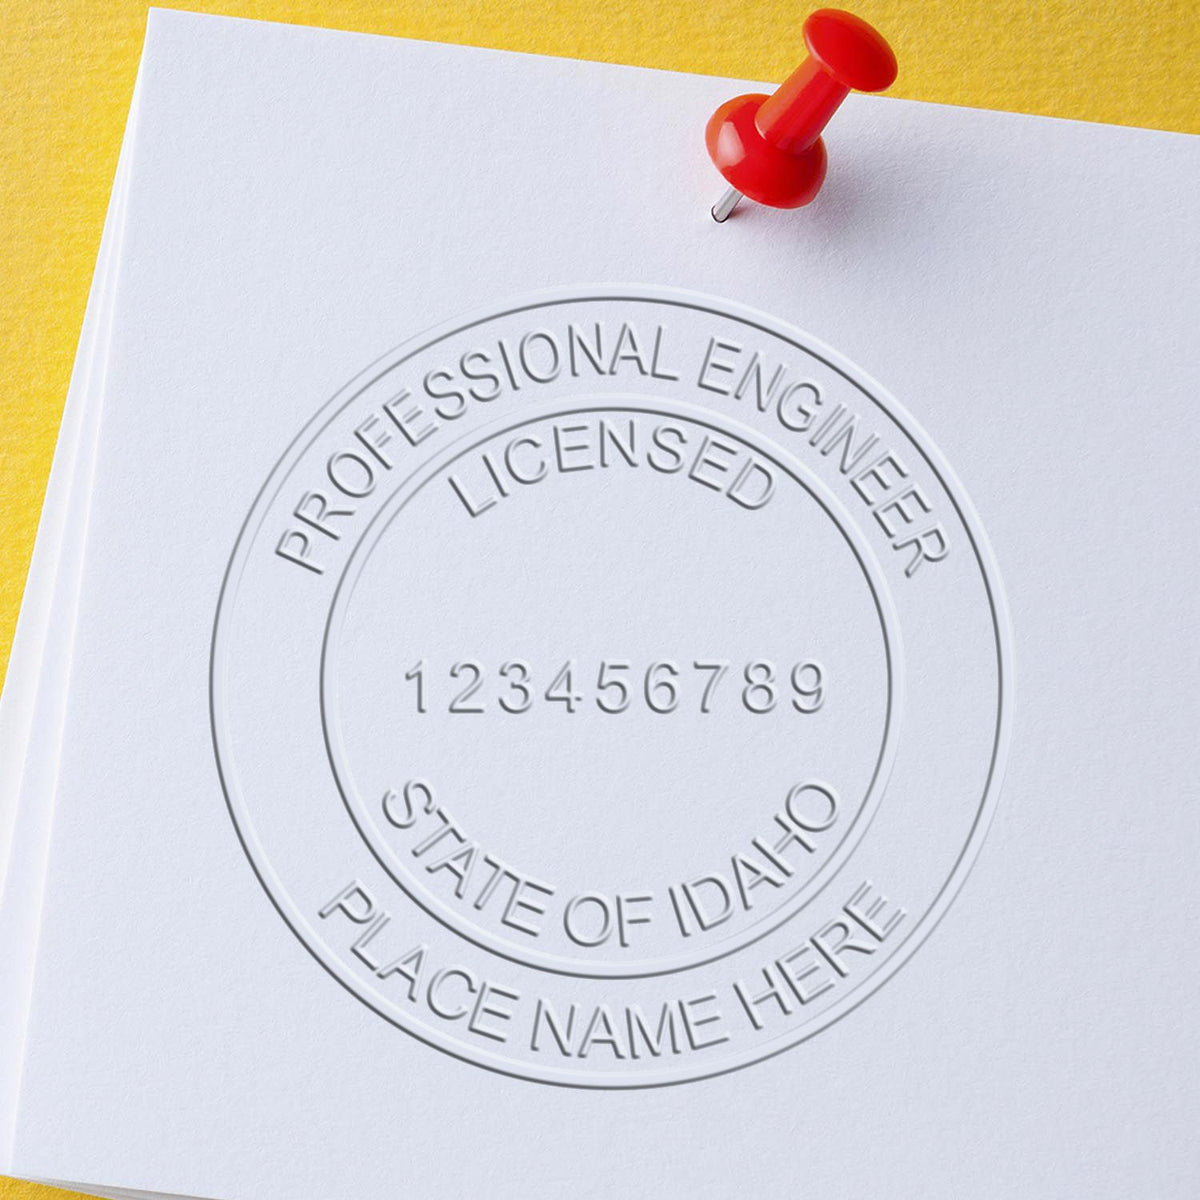 A stamped impression of the Handheld Idaho Professional Engineer Embosser in this stylish lifestyle photo, setting the tone for a unique and personalized product.